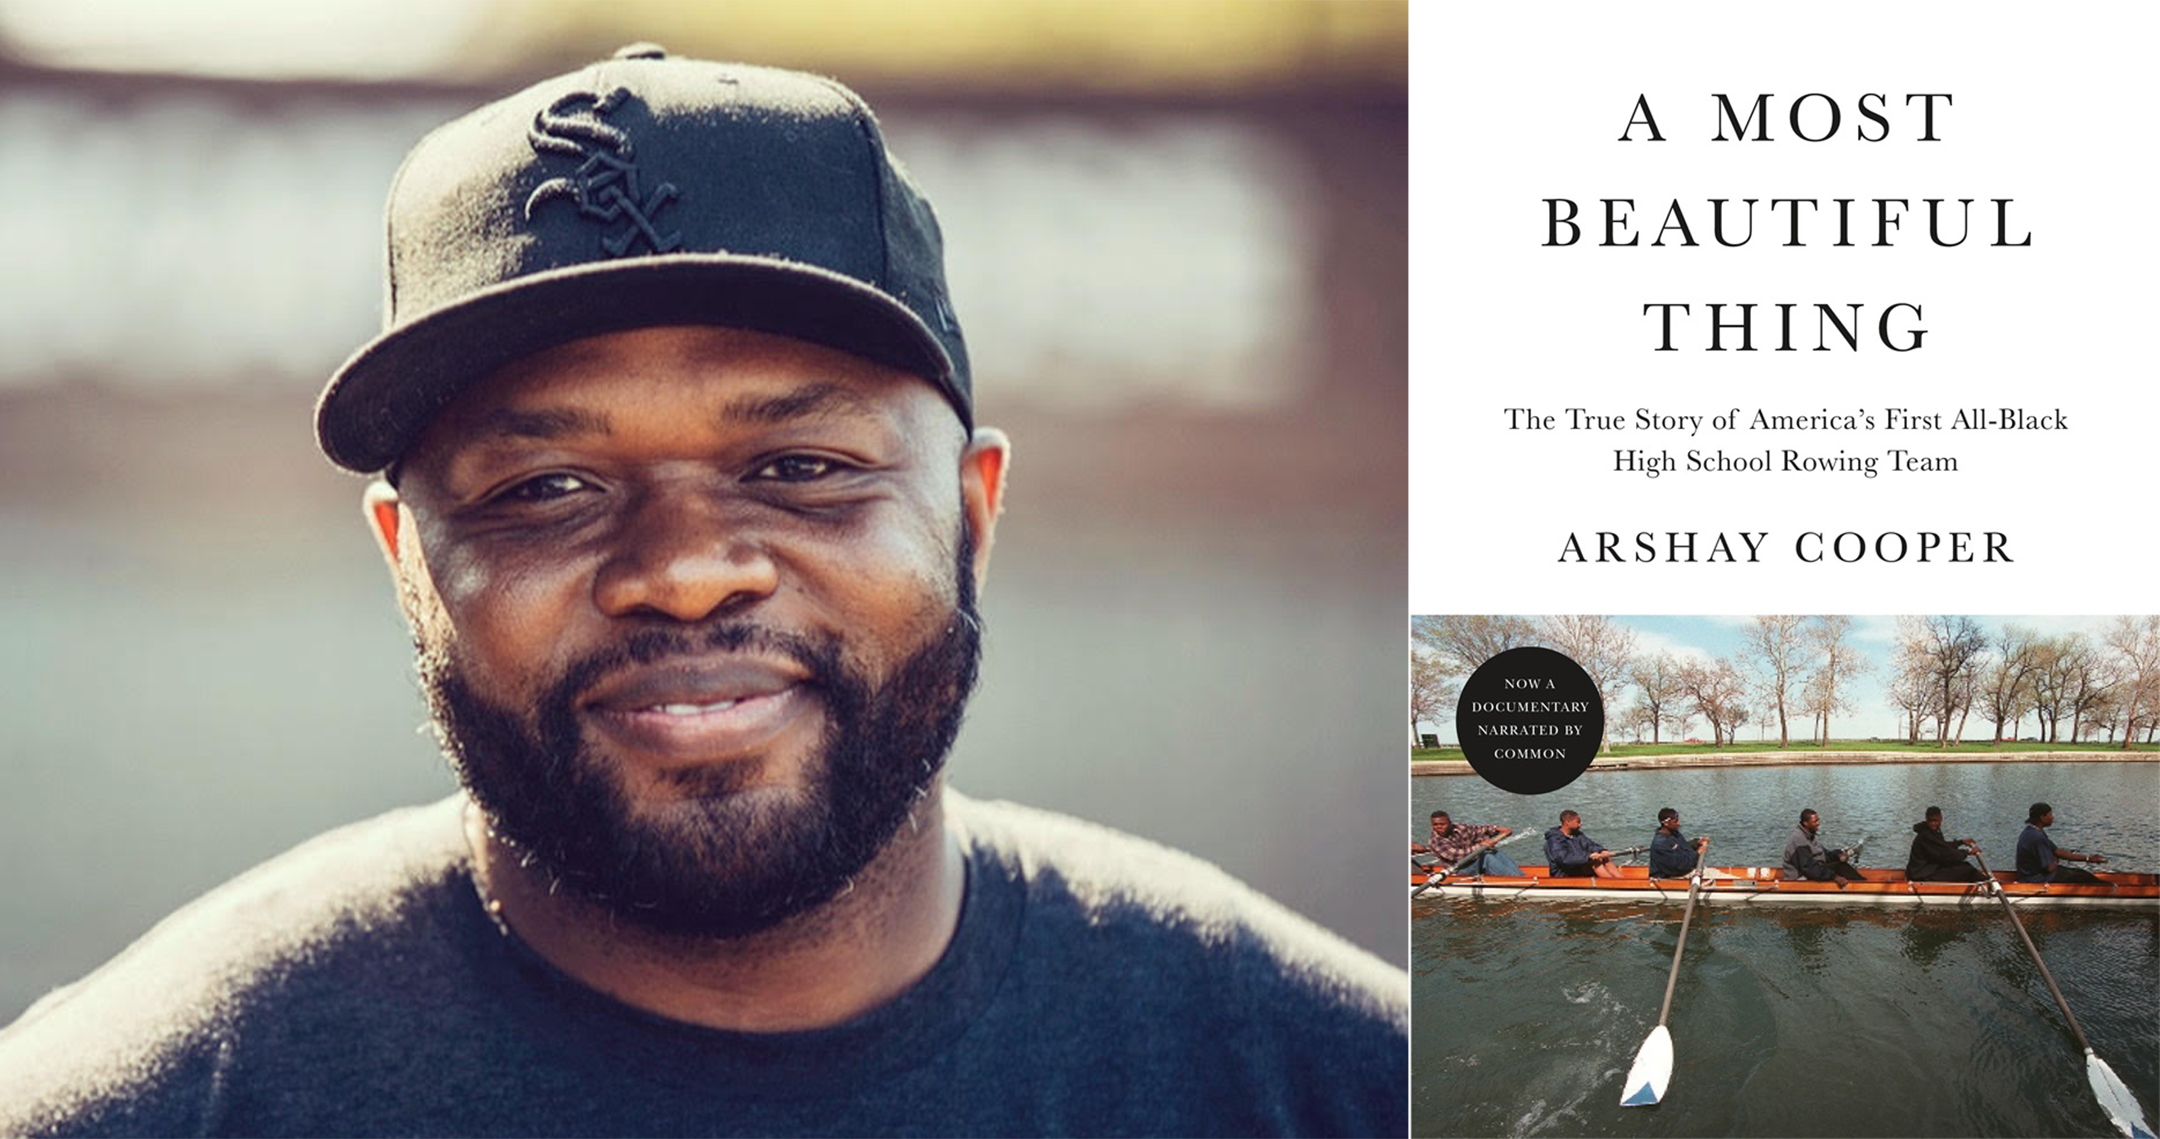 author photo of arshay cooper (left) and the cover of his book a most beautiful thing (right)